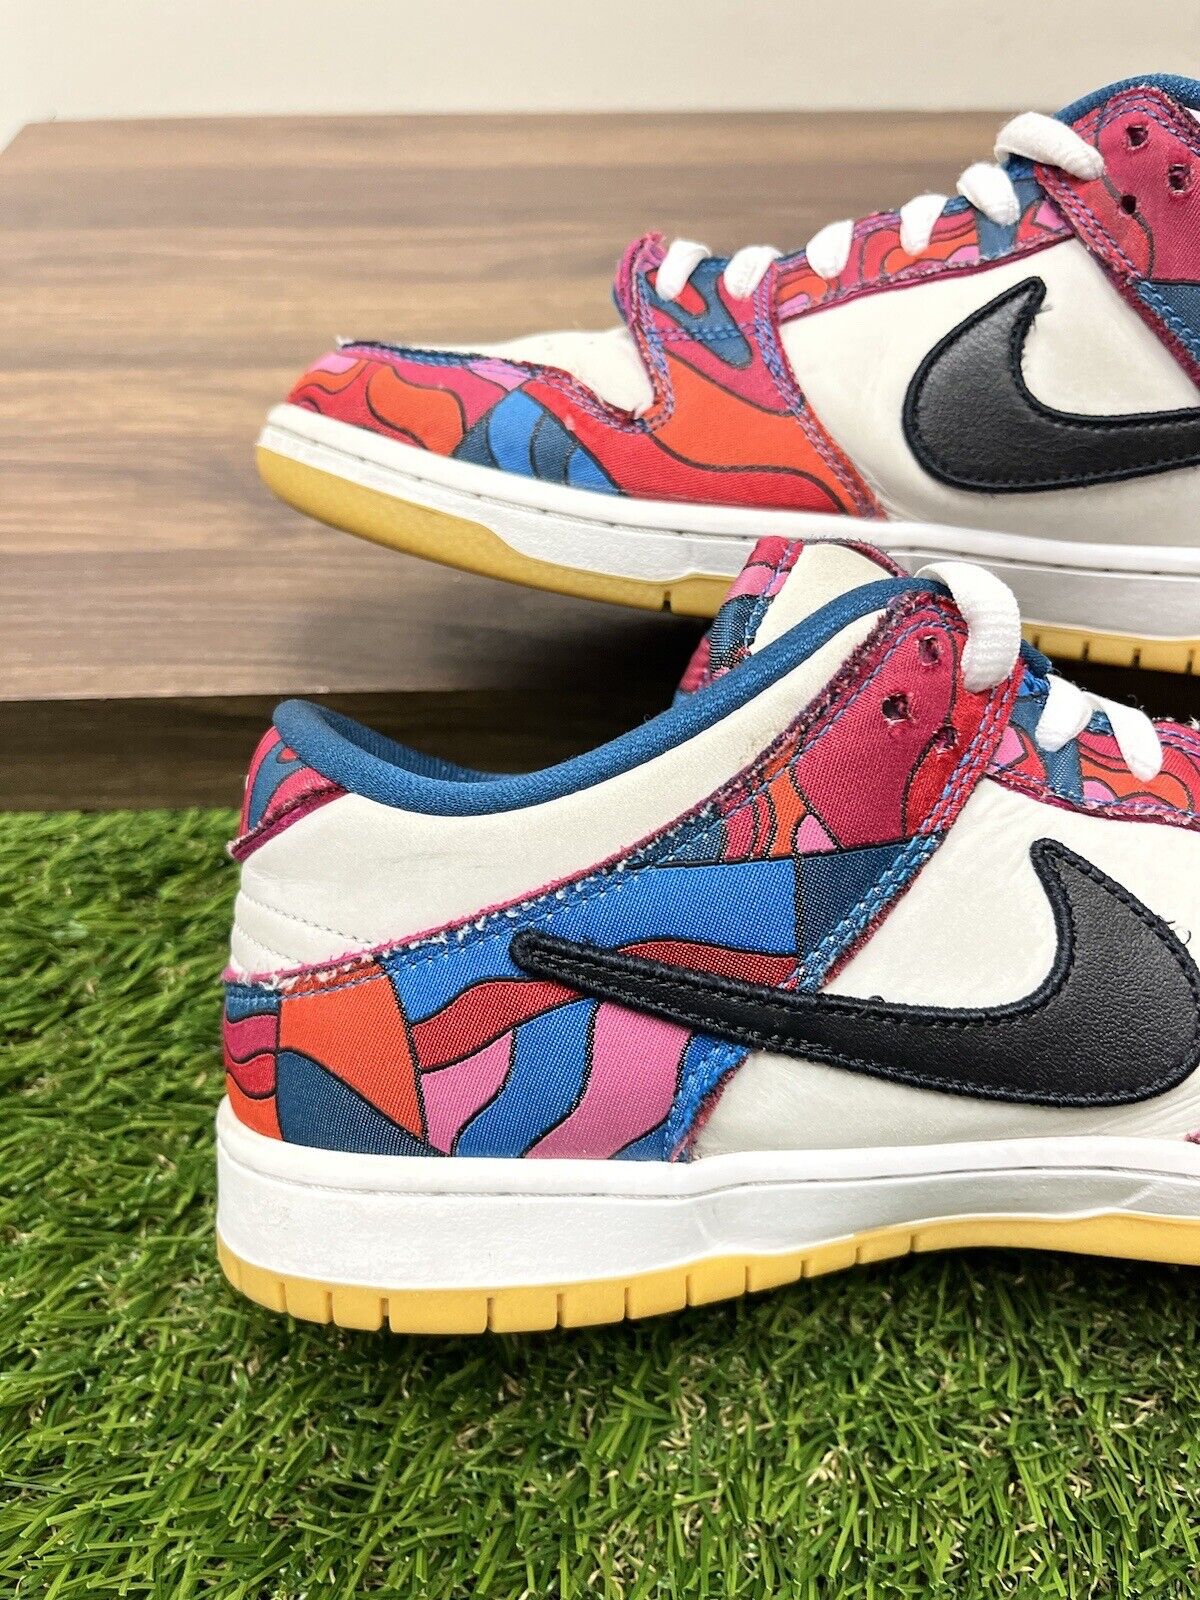 Nike Dunk Low Pro SB x Parra ‘Abstract Art’ Size 11